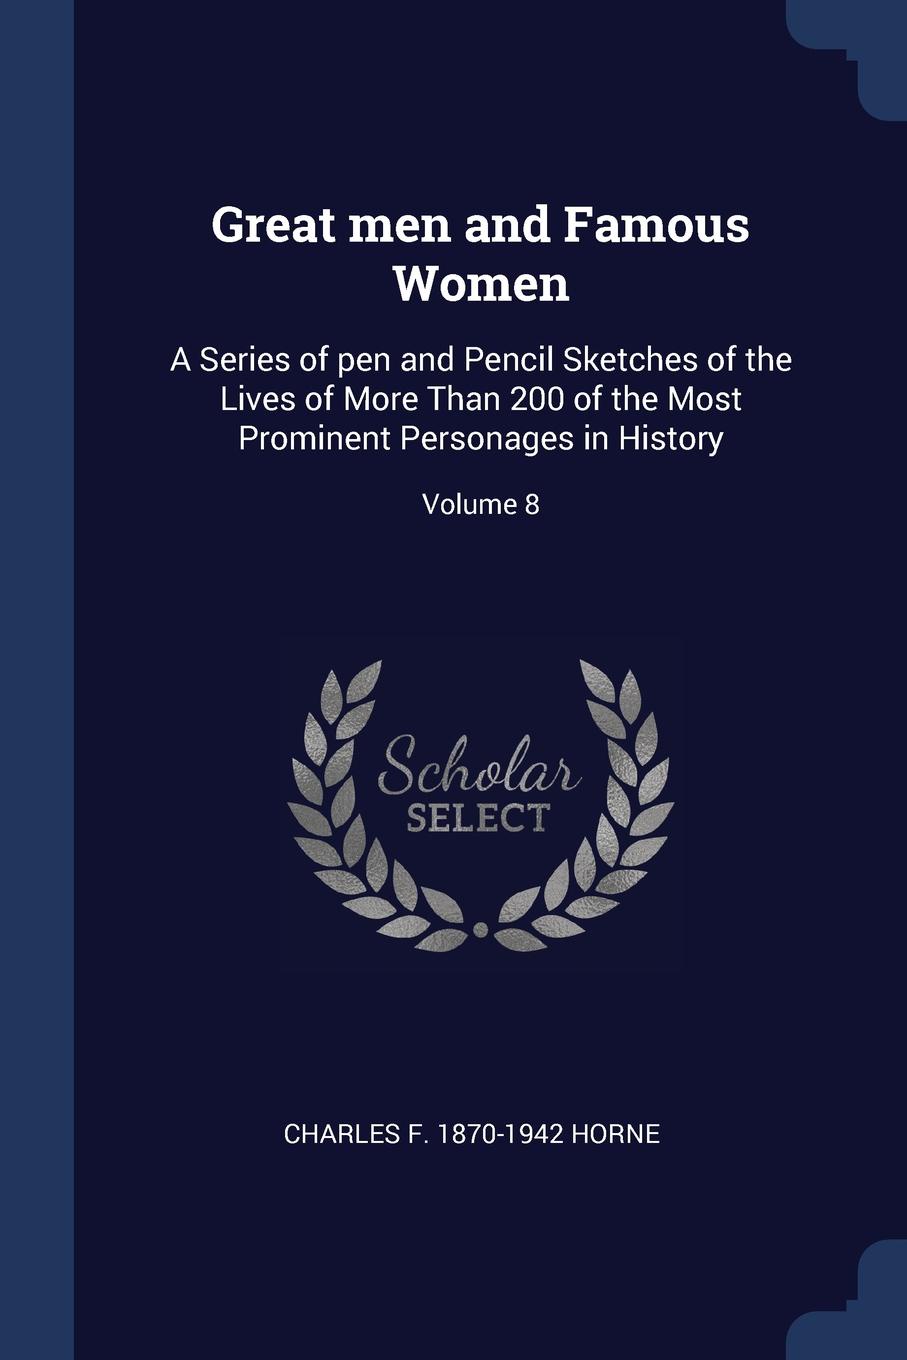 Great men and Famous Women. A Series of pen and Pencil Sketches of the Lives of More Than 200 of the Most Prominent Personages in History; Volume 8